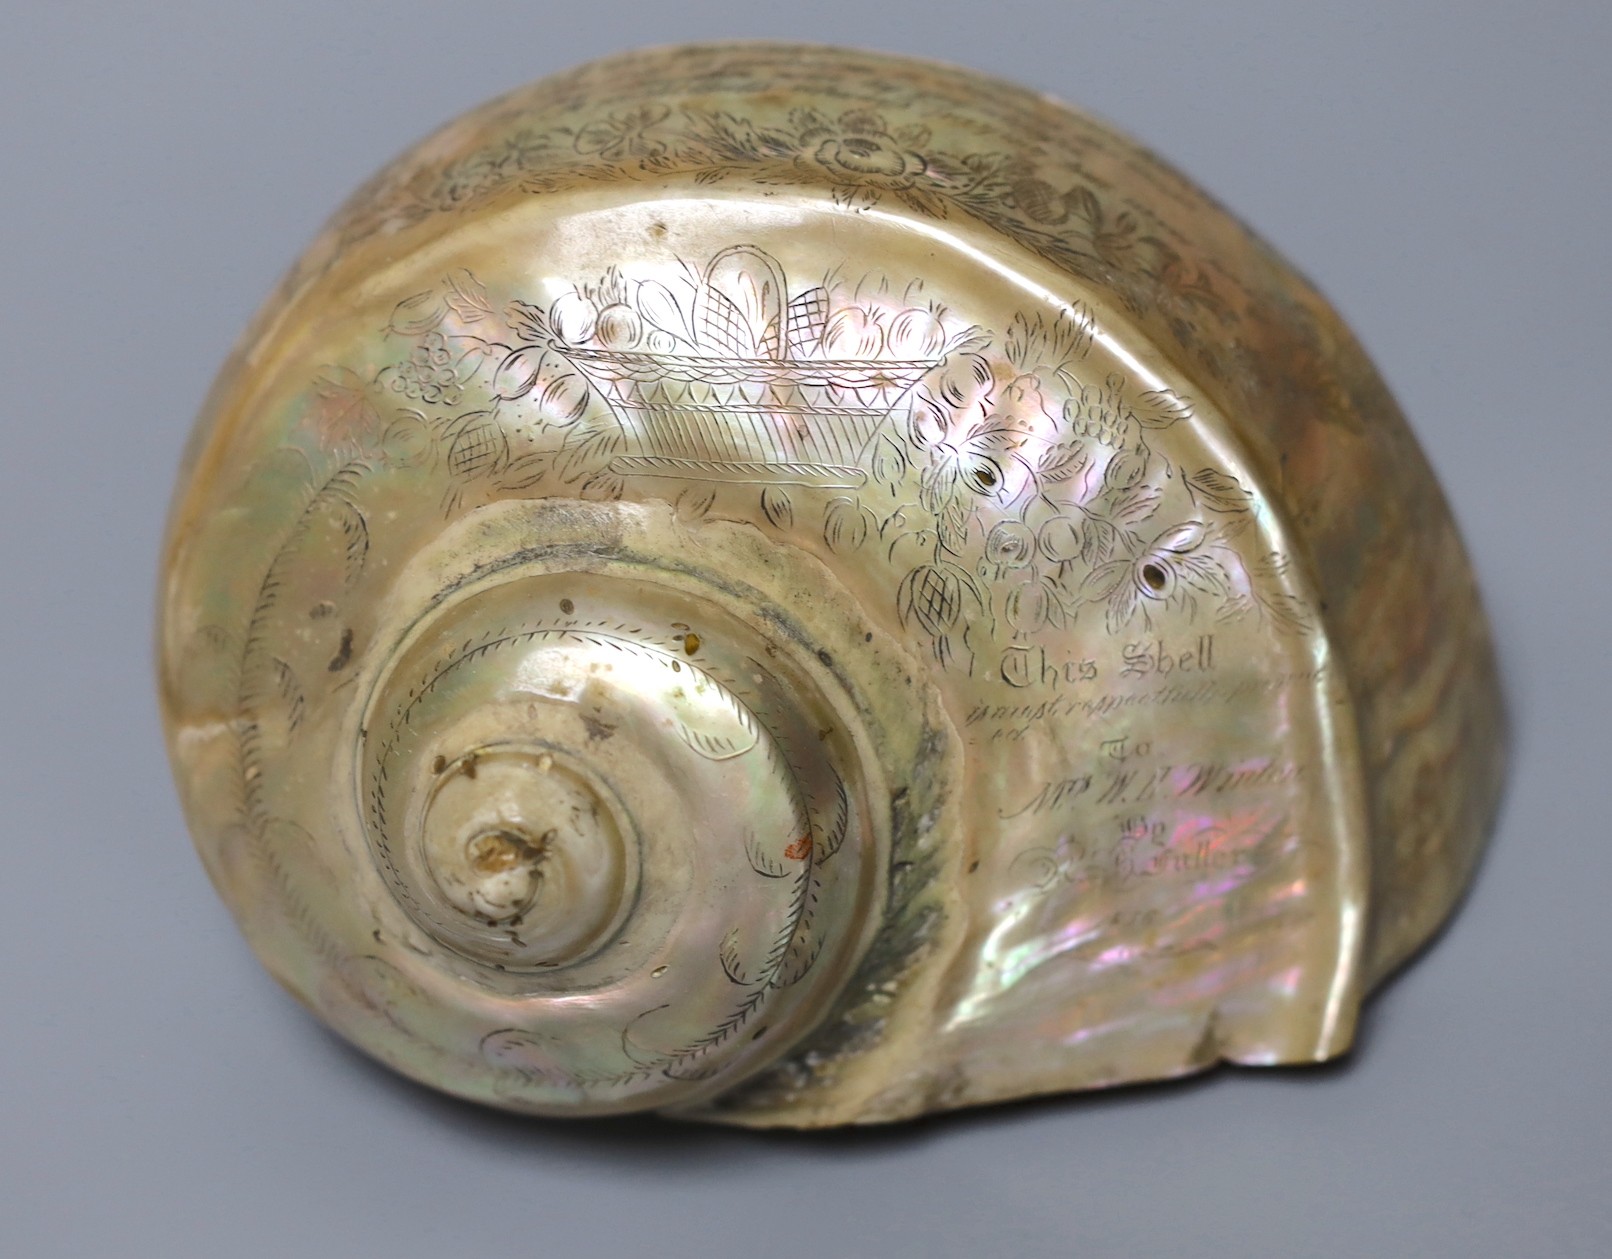 Two inscribed opalescent sea shells, both dated 1856